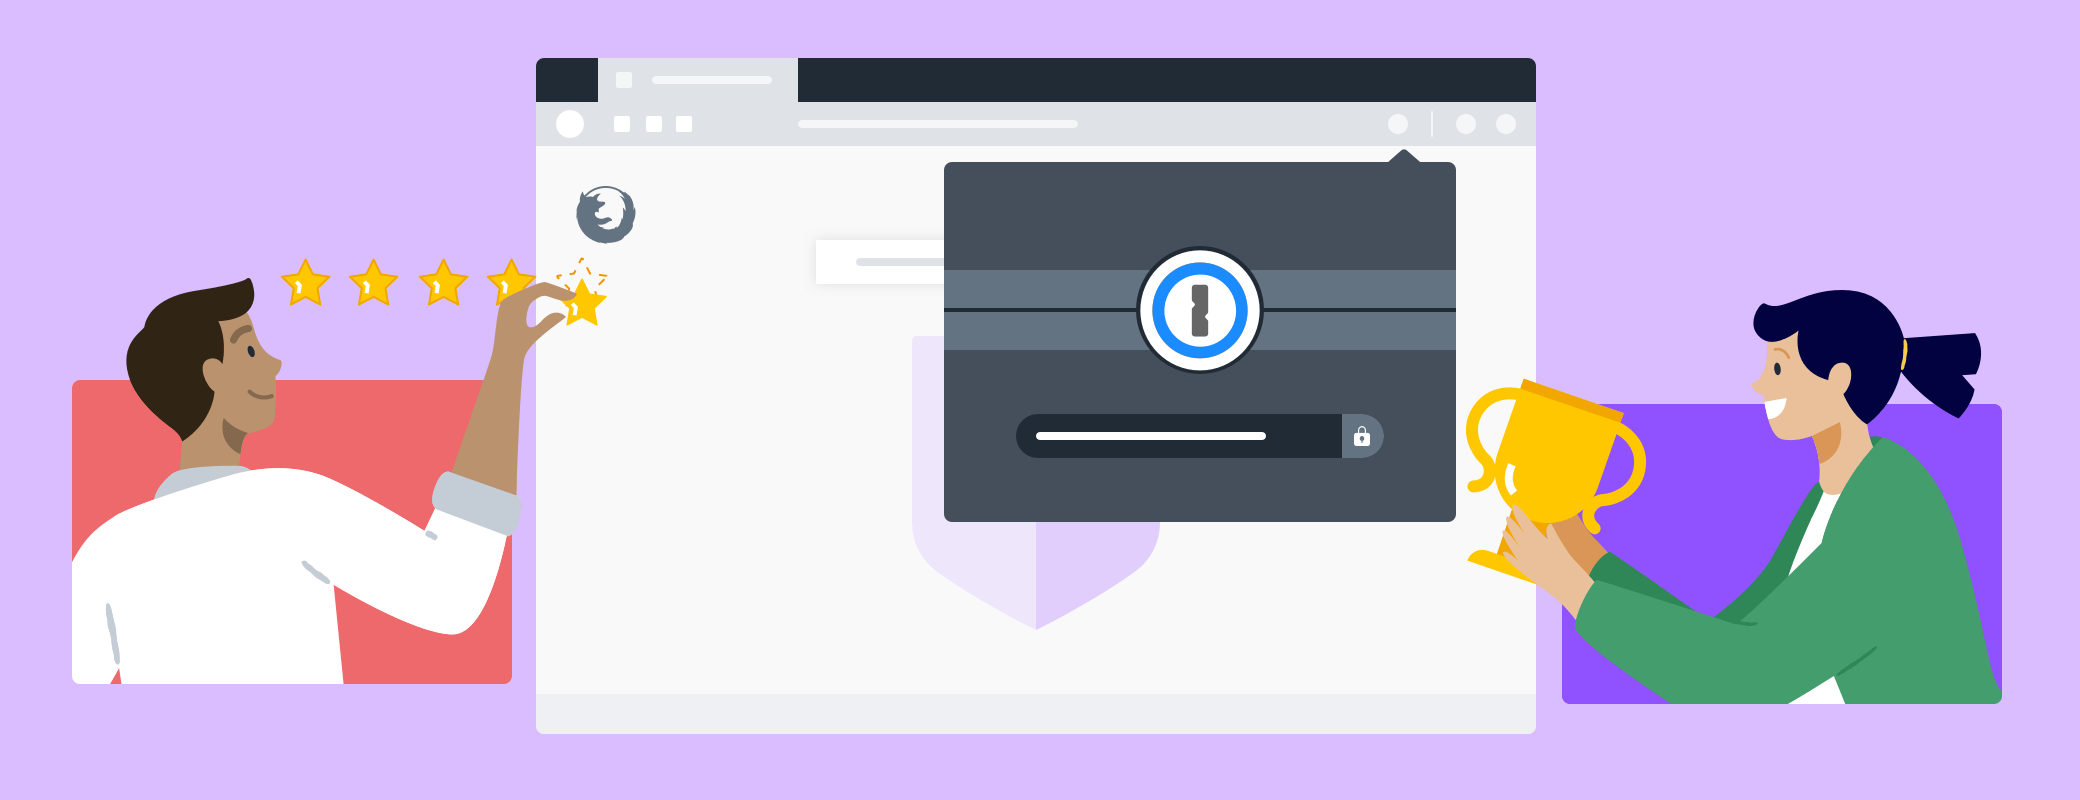 Mozilla has selected 1Password X as a Recommended Extension for Firefox